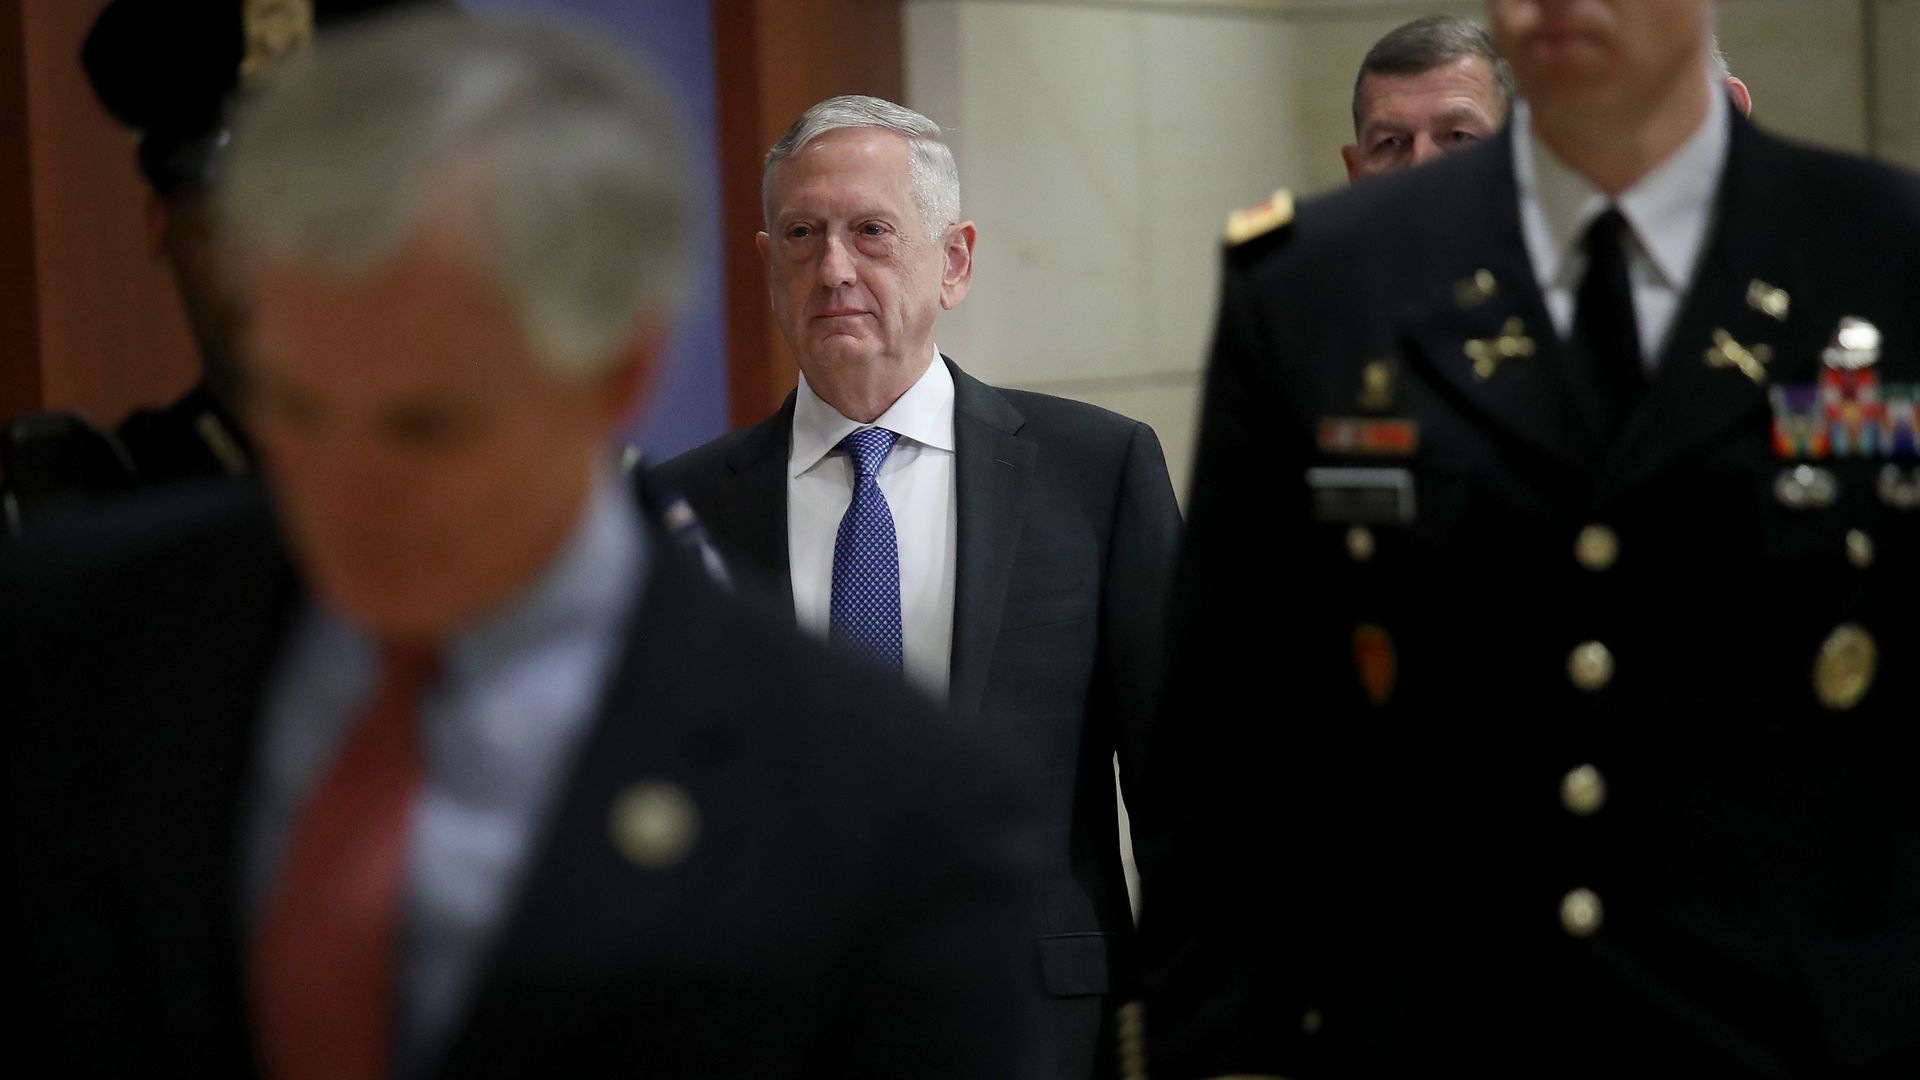 Jim Mattis walks down a hallway behind decorated and uniformed military personnel. 